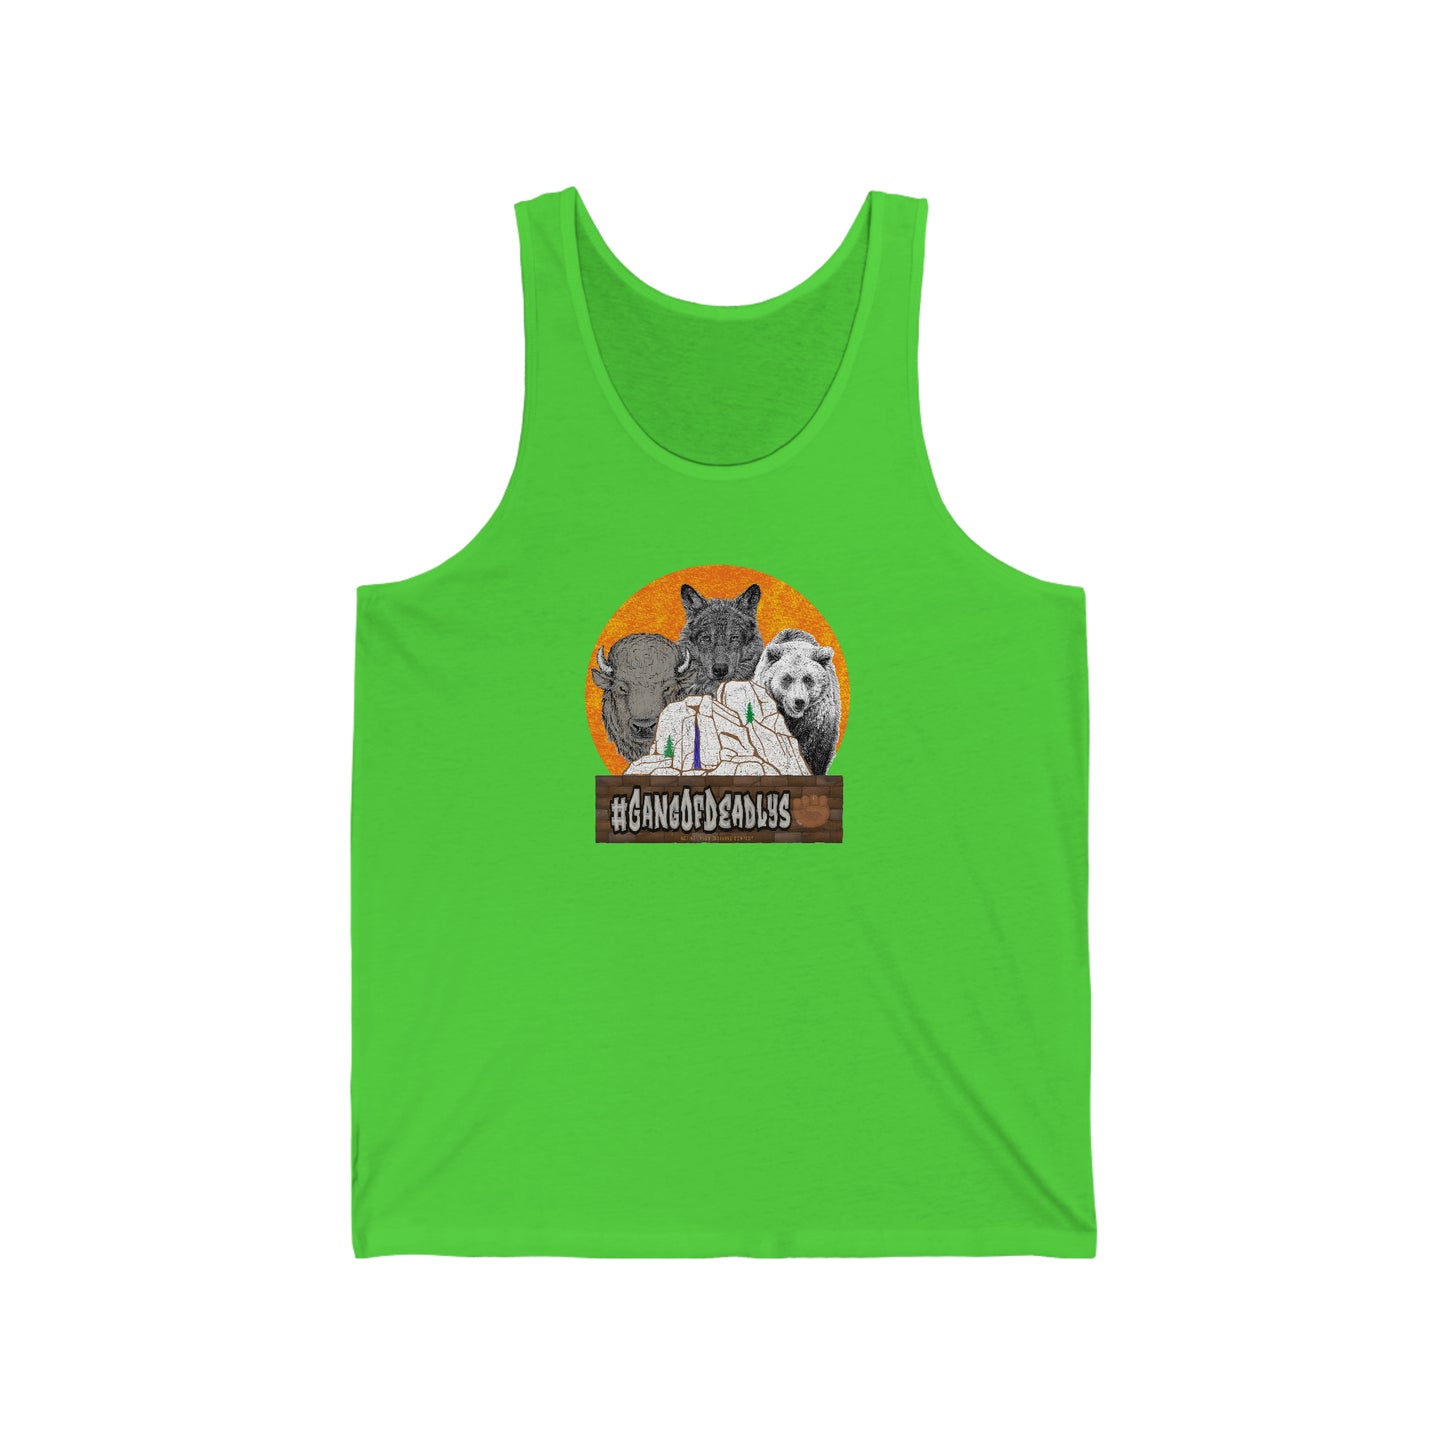 Gang Of Deadlys Tank Top Native American (Special Order)